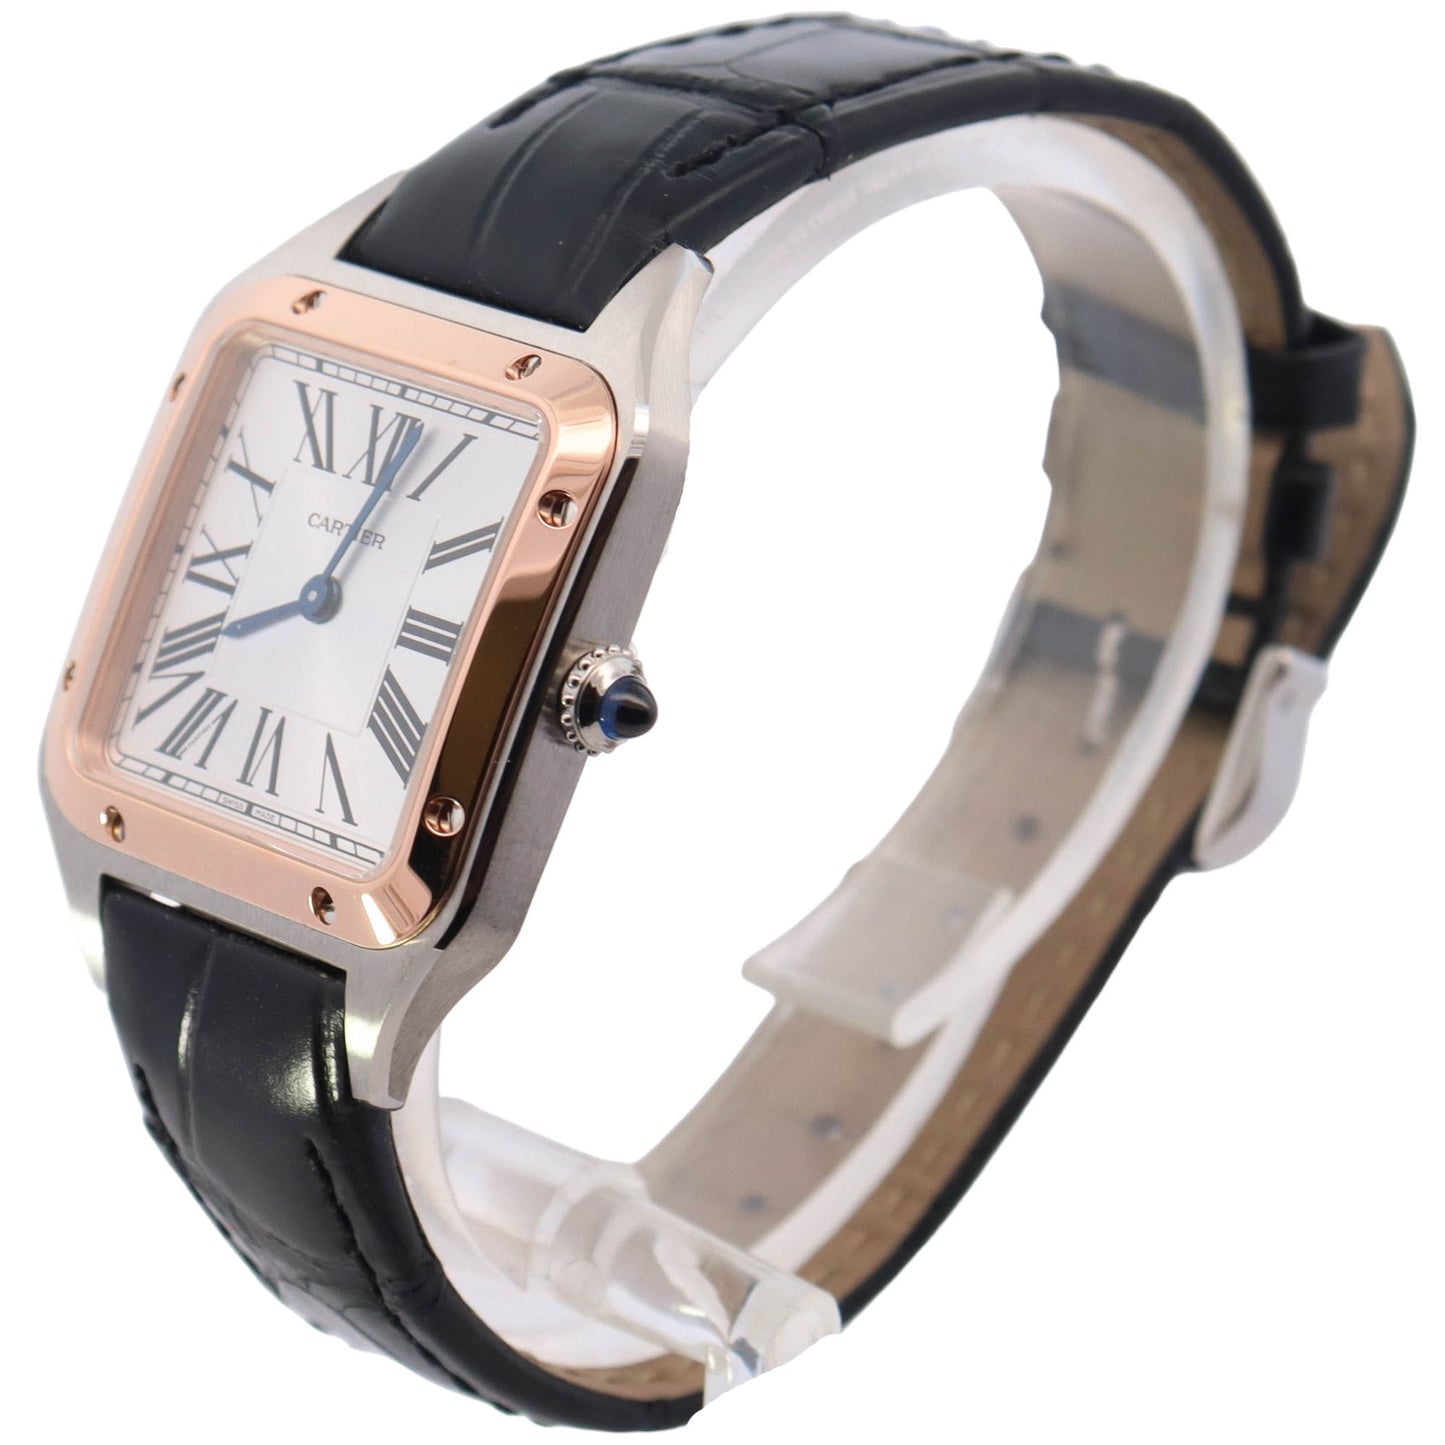 Cartier Santos Dumont Stainless Steel & Rose Gold 28mm X 38mm White Roman Dial Watch Reference# W2SA0012